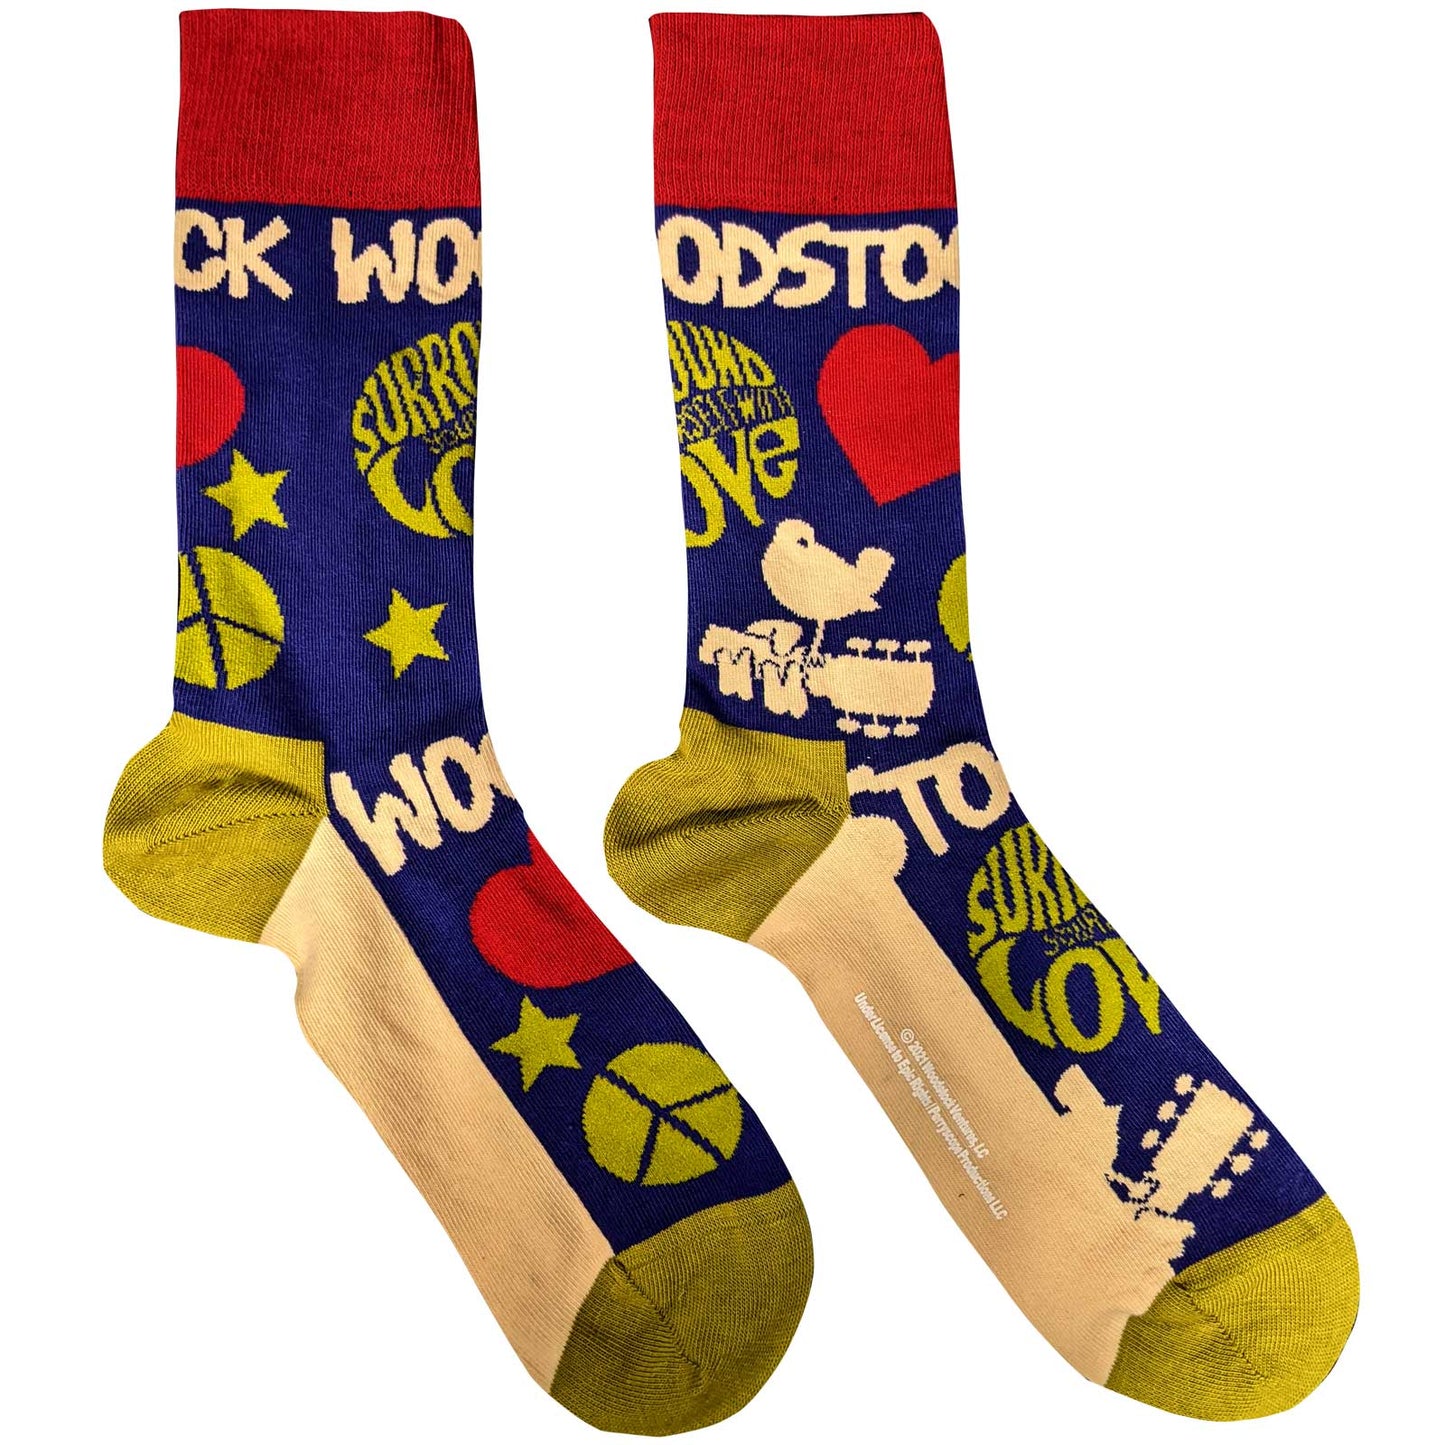 Woodstock Surround Yourself Ankle Socks